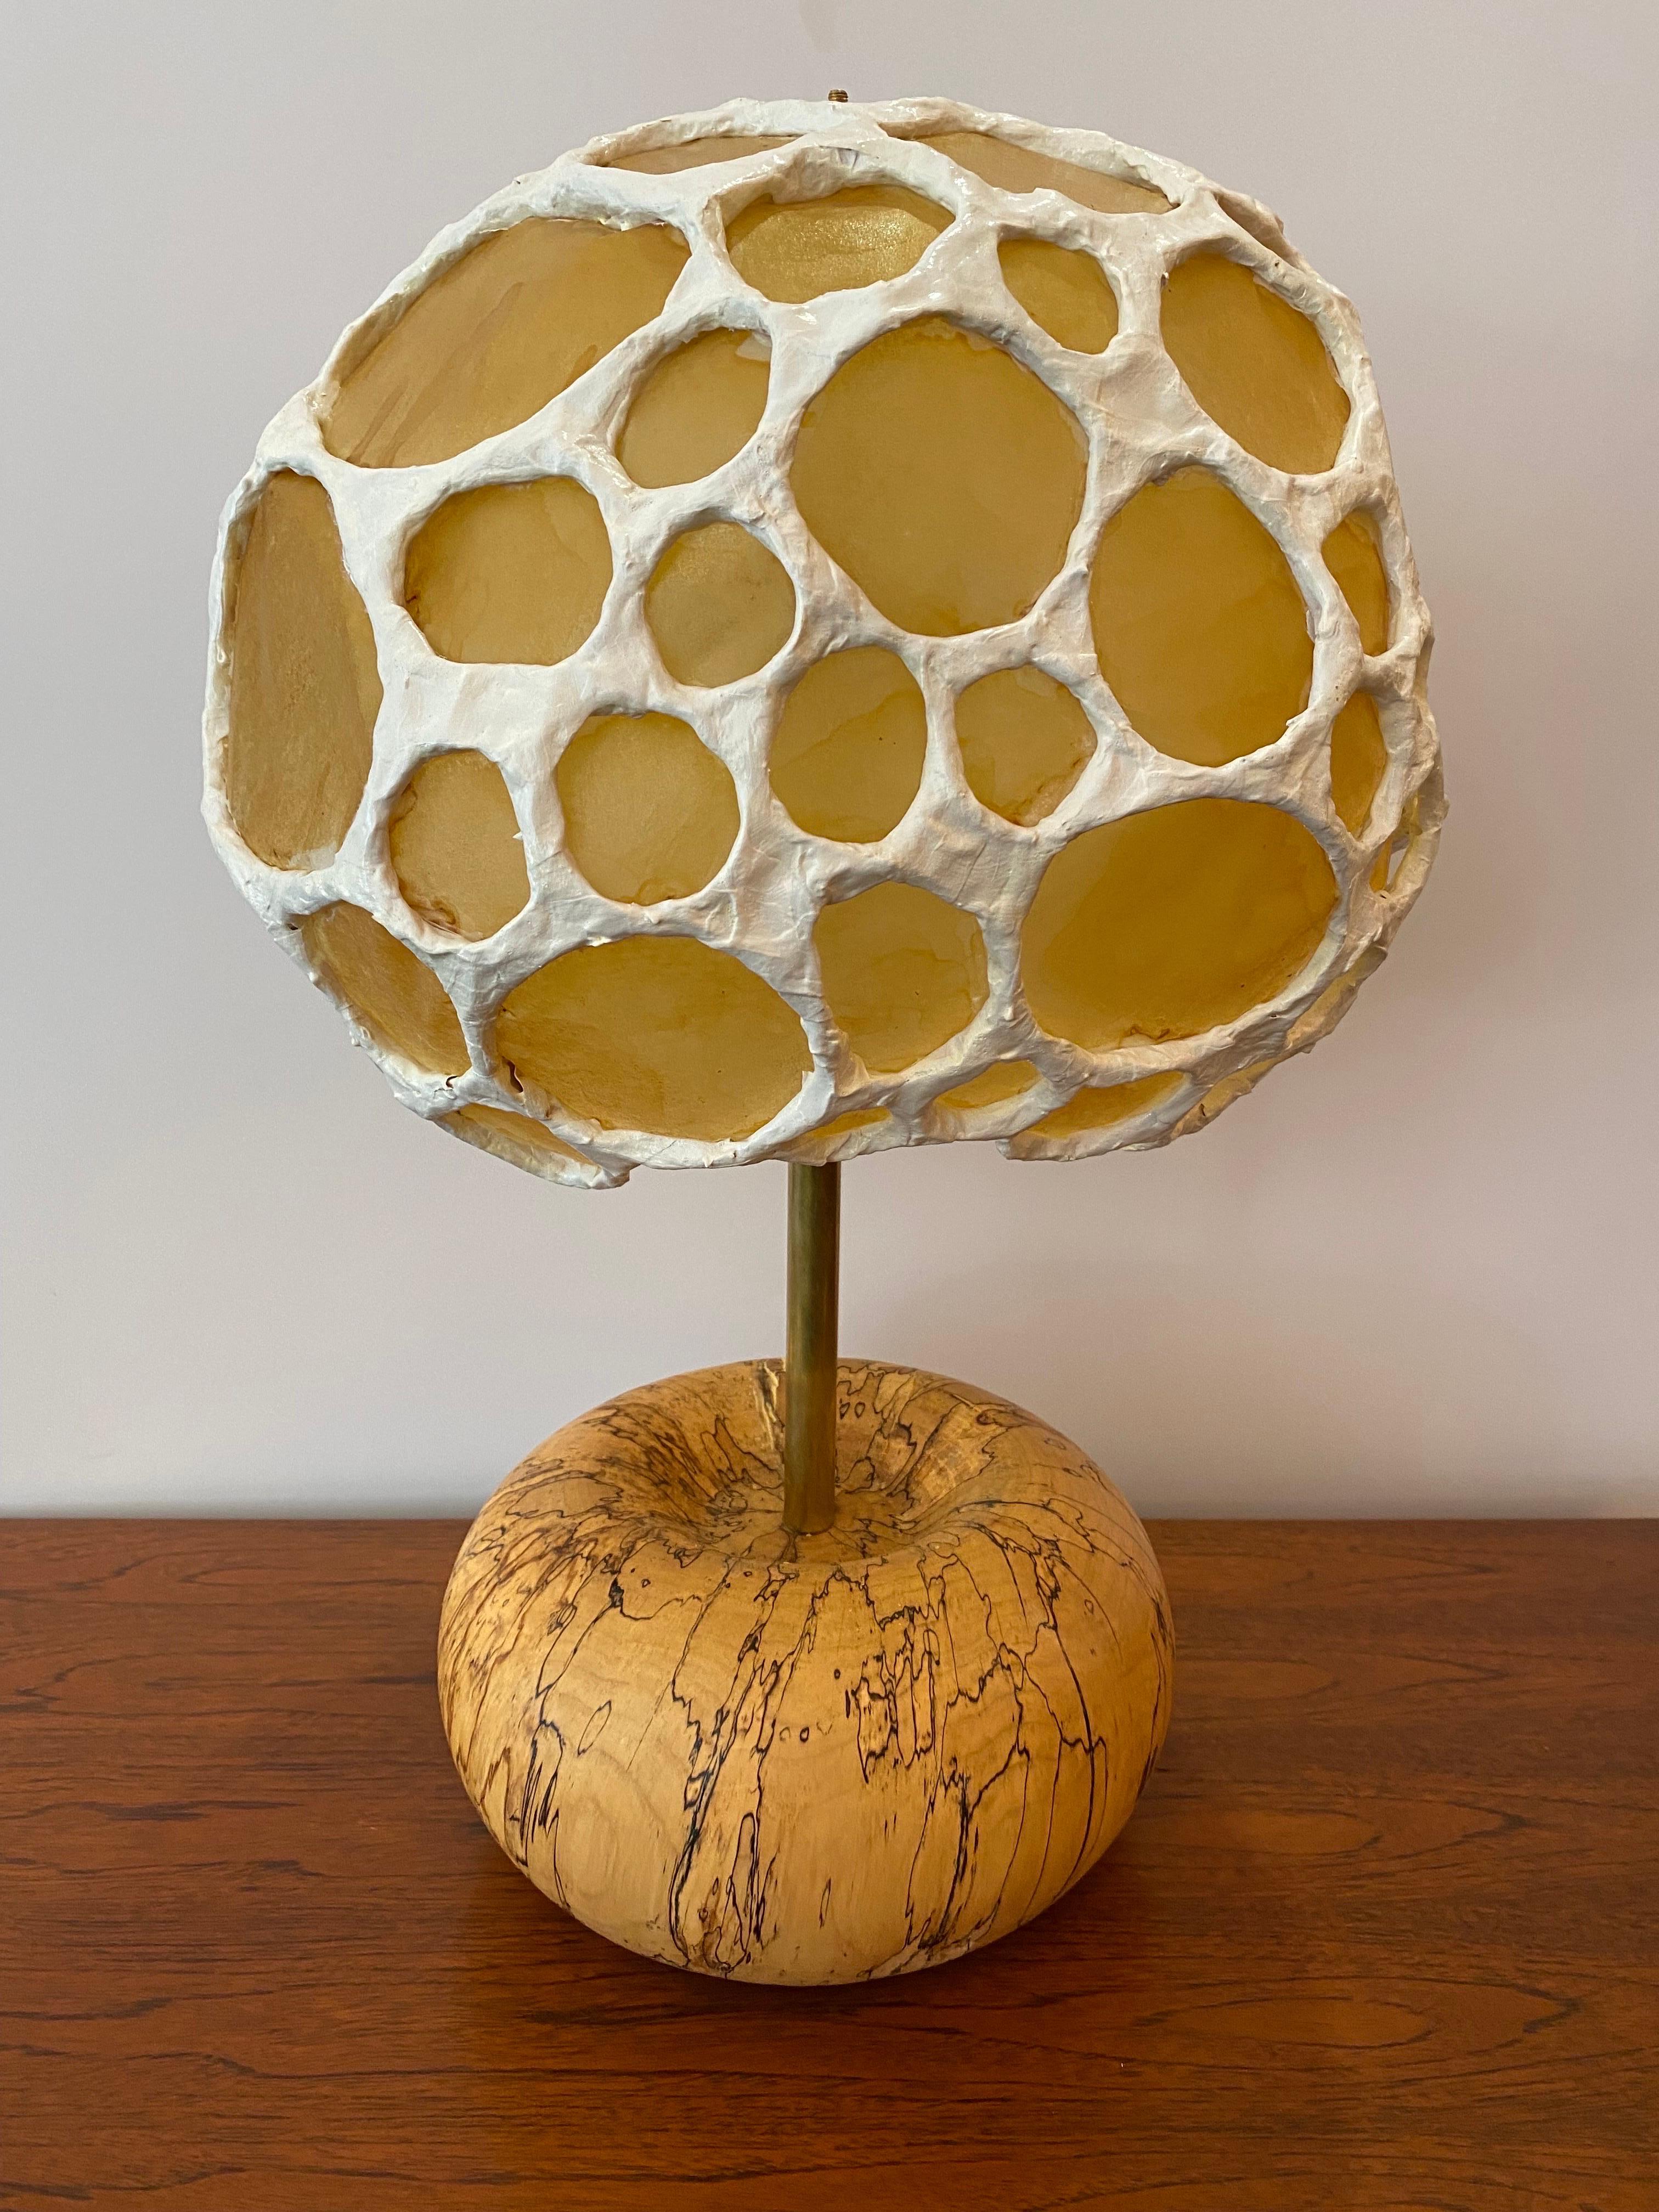 The base of this Morchella lamp is made from turned end-grain spalted maple. Spalting occurs when fungi invade and digest wood. The line patterns that form are called zone lines. These zone lines are barriers that fungal agents produce in order to